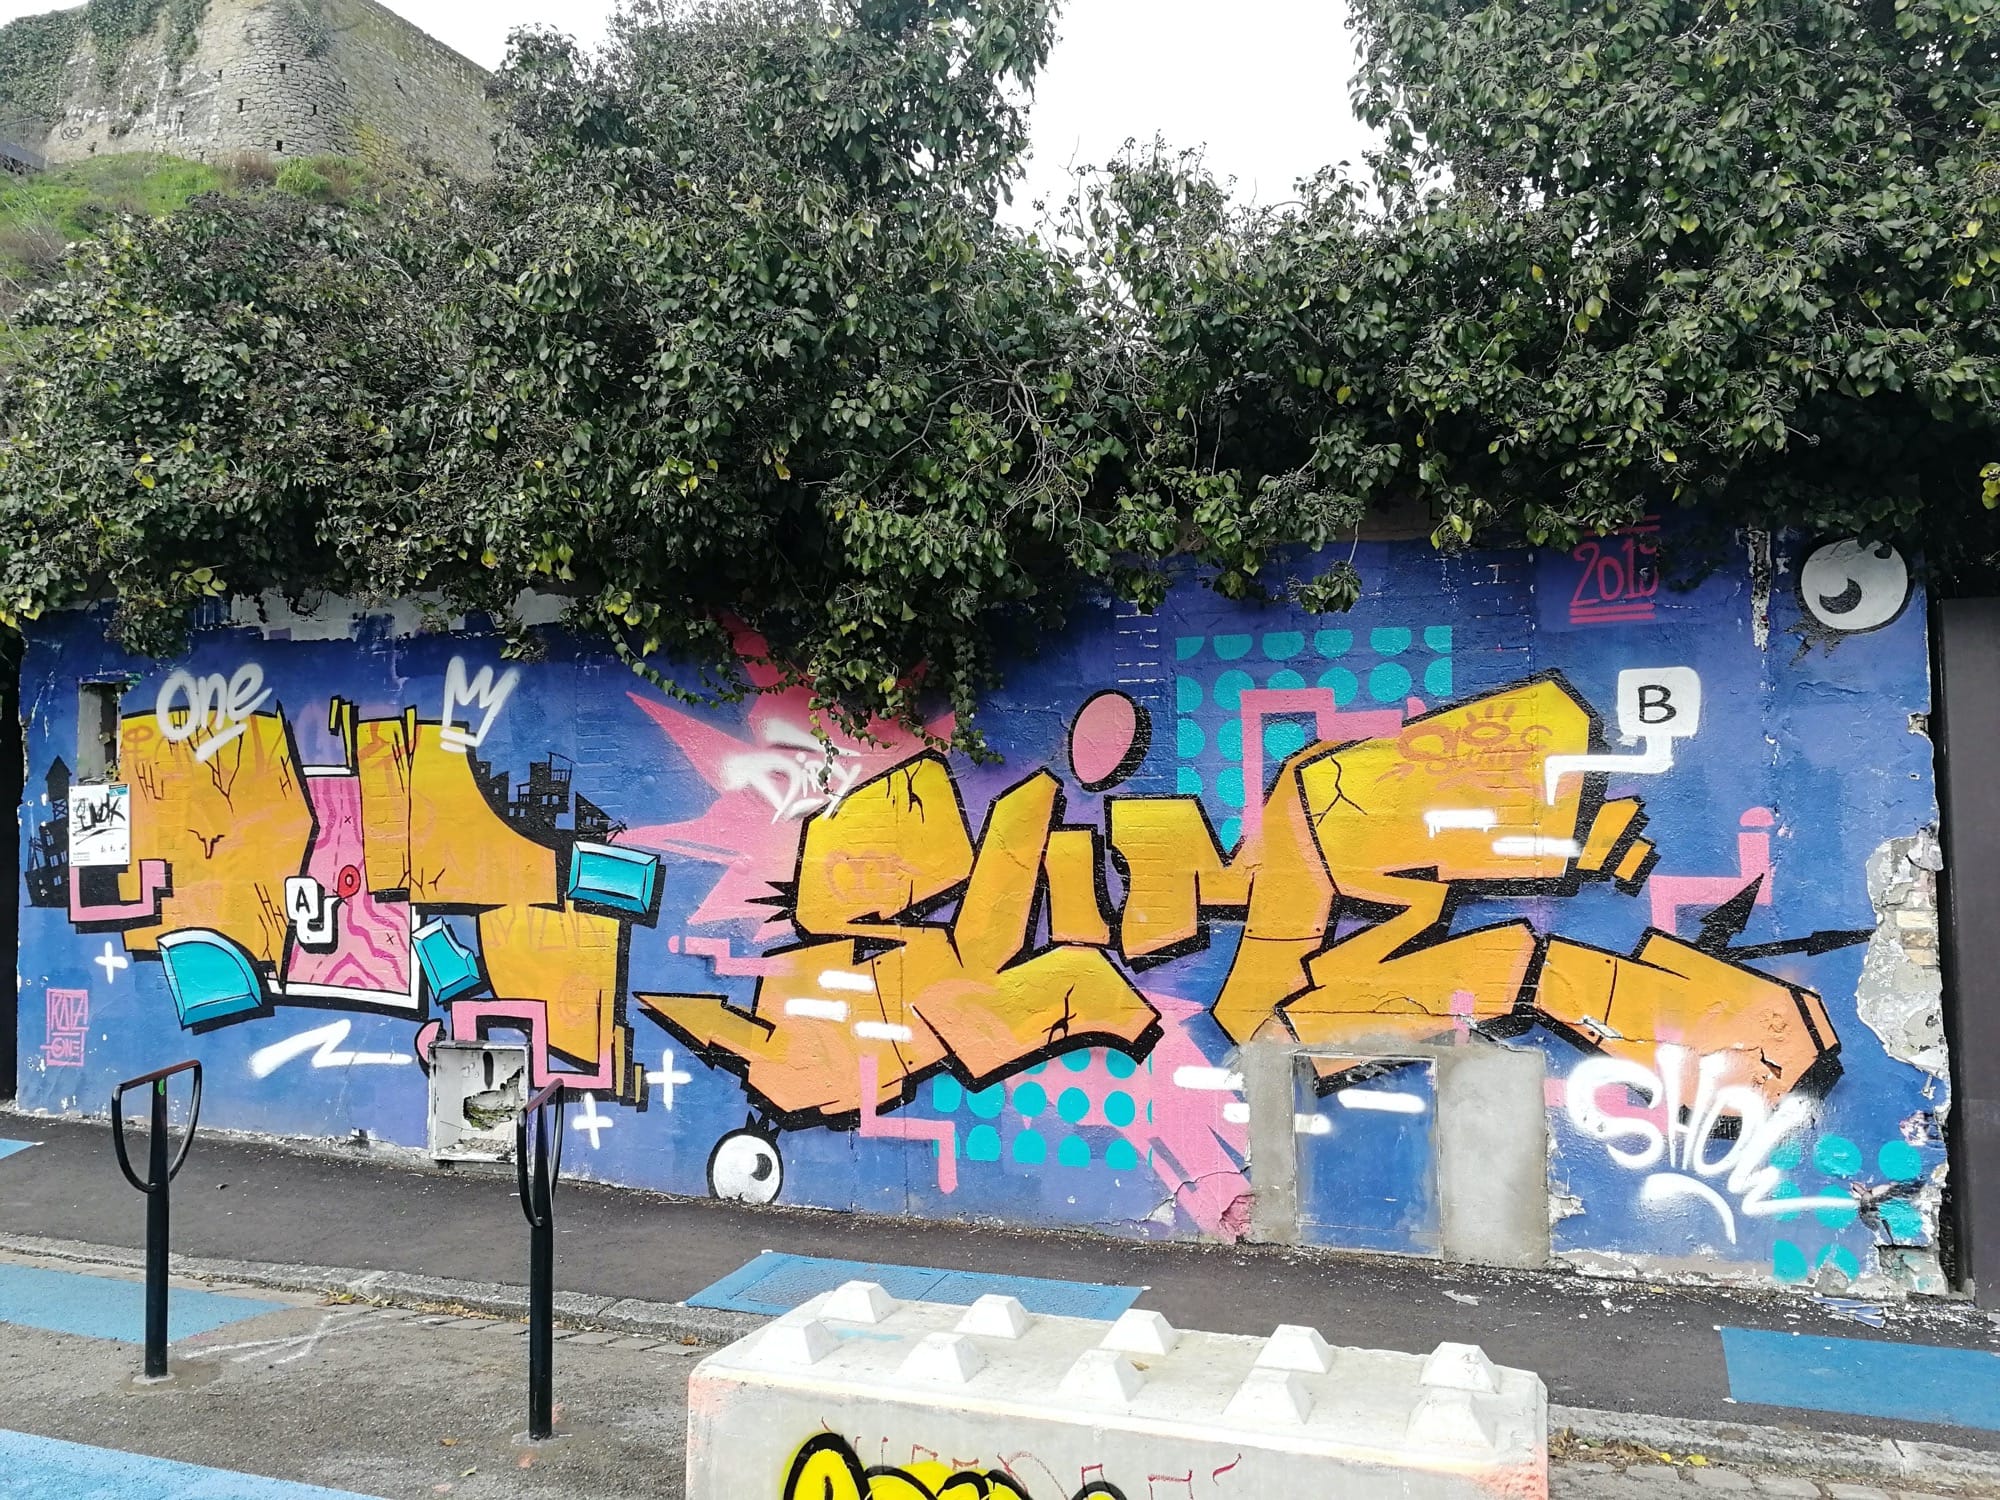 Graffiti 4029  captured by Rabot in Nantes France